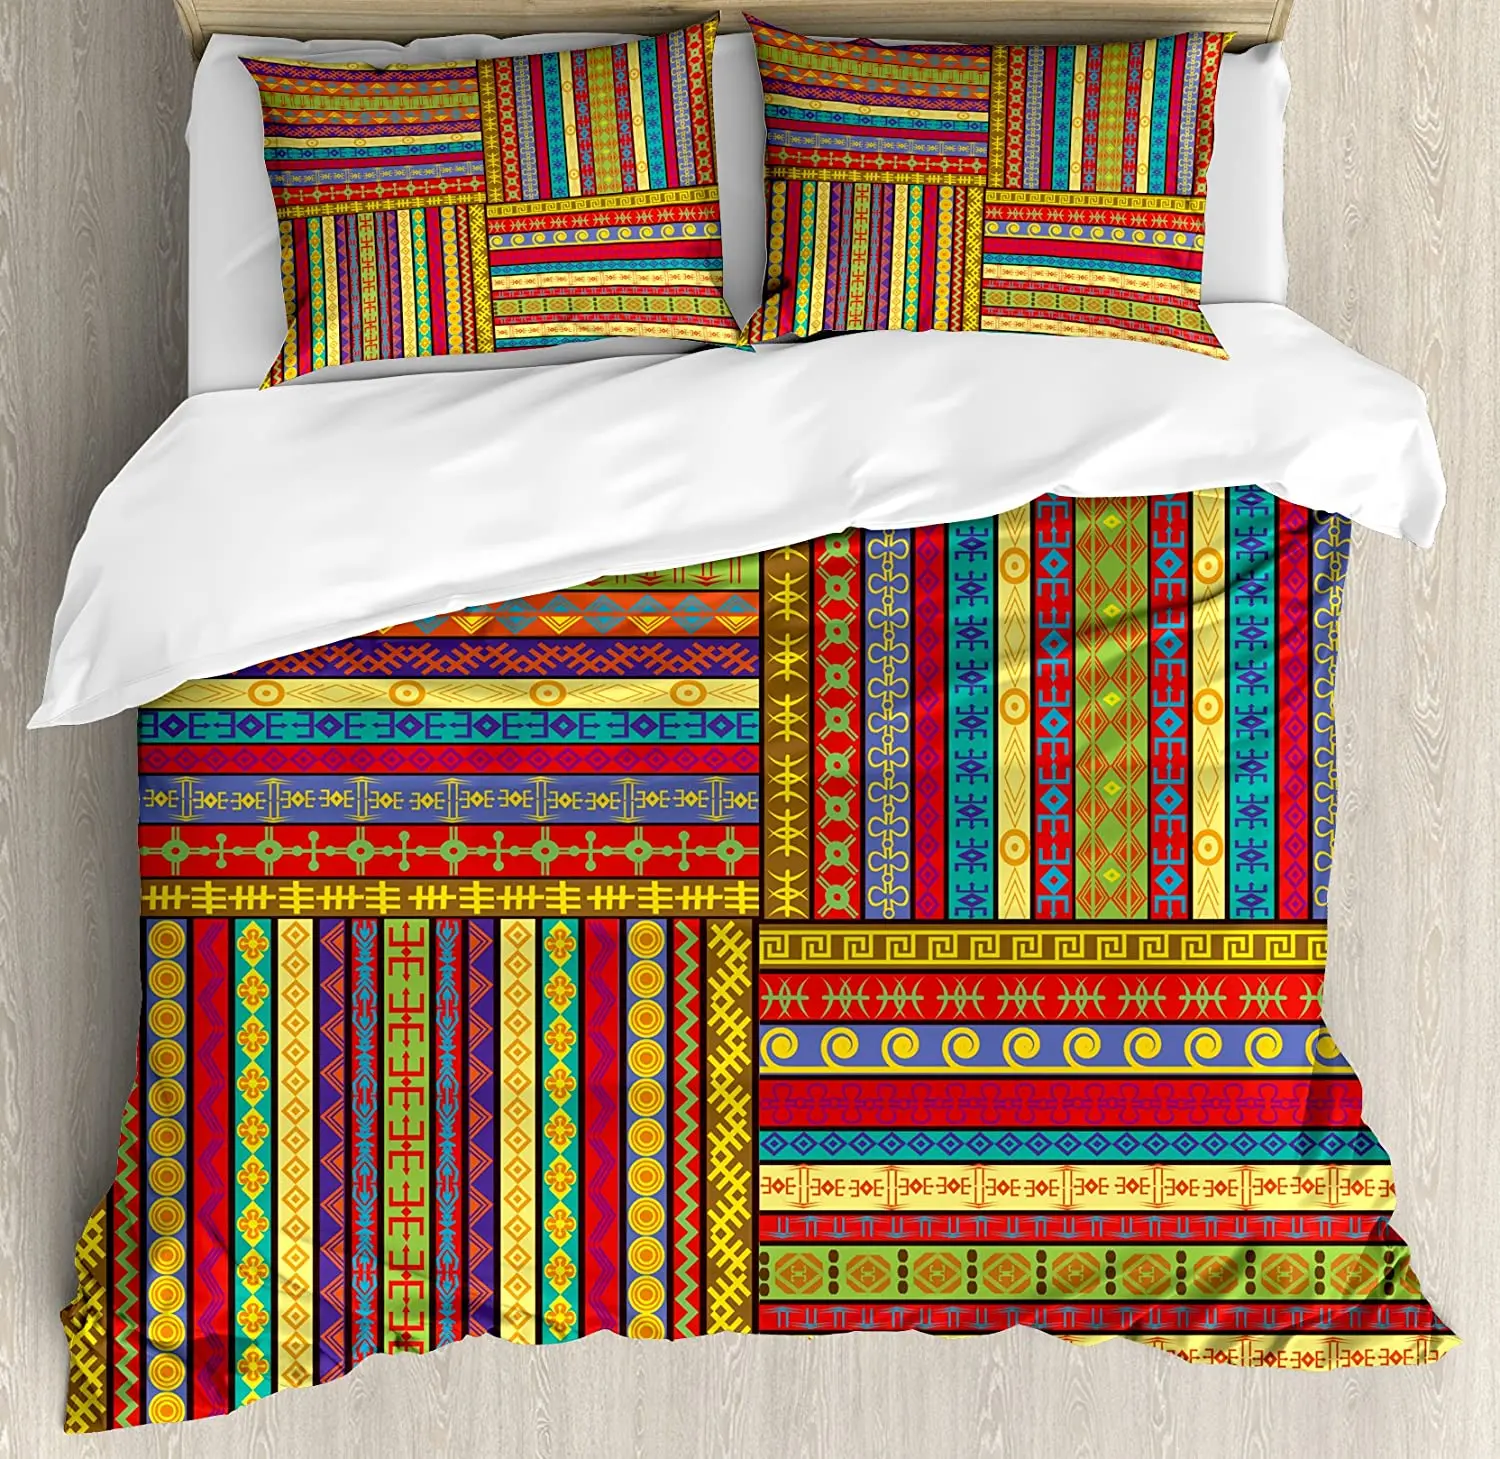 

African Bedding Set For Bedroom Bed Home Ethnic Borders Pattern Old Fashioned Ancient Cult Duvet Cover Quilt Cover Pillowcase